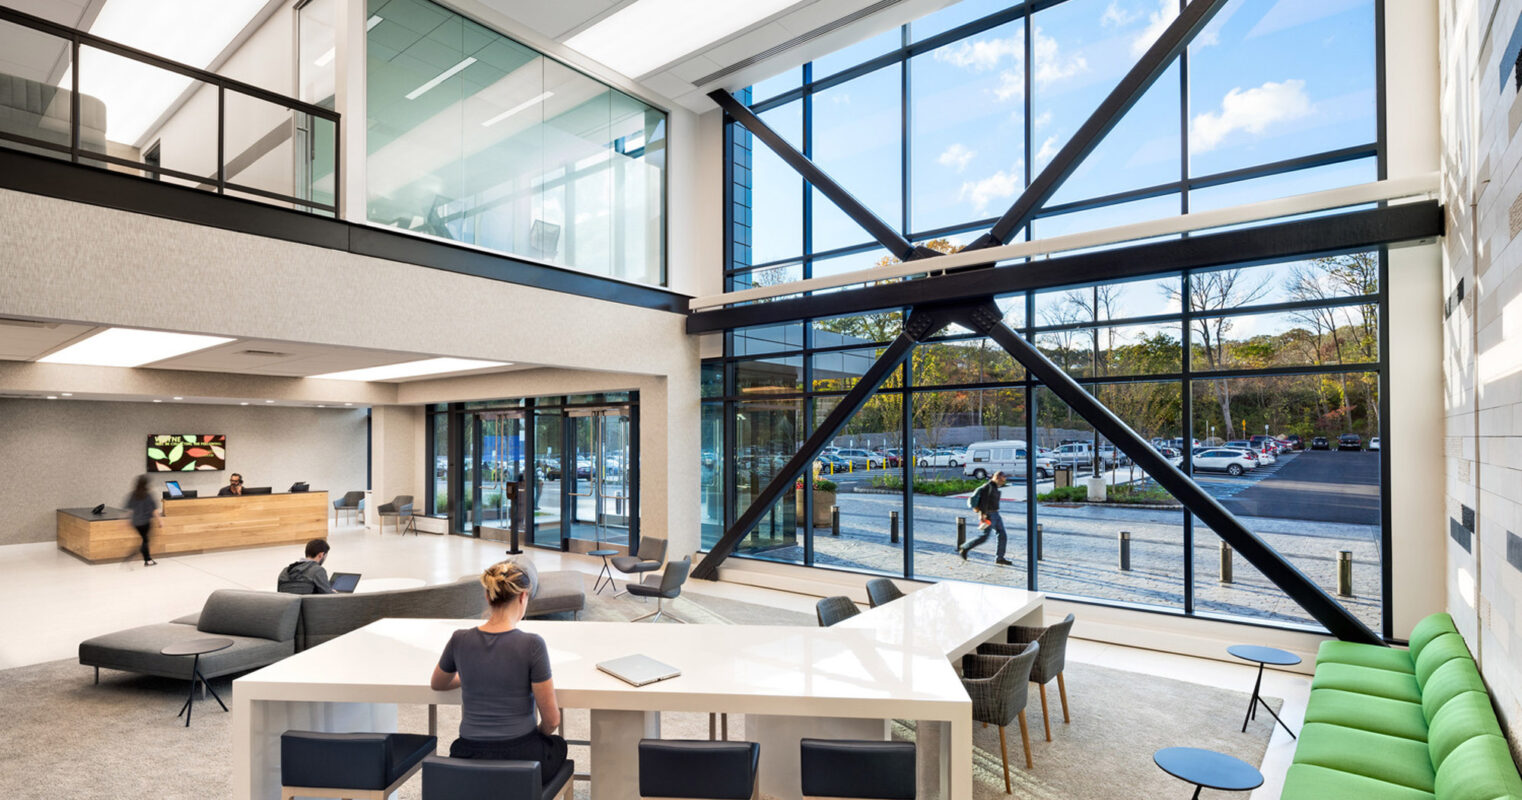 Spacious modern lobby with expansive glass walls, geometric black support beams, and abundant natural light. A reception desk pairs with minimalist furniture, featuring a neutral color palette with green accent seating, promoting a sleek, open-plan corporate environment.